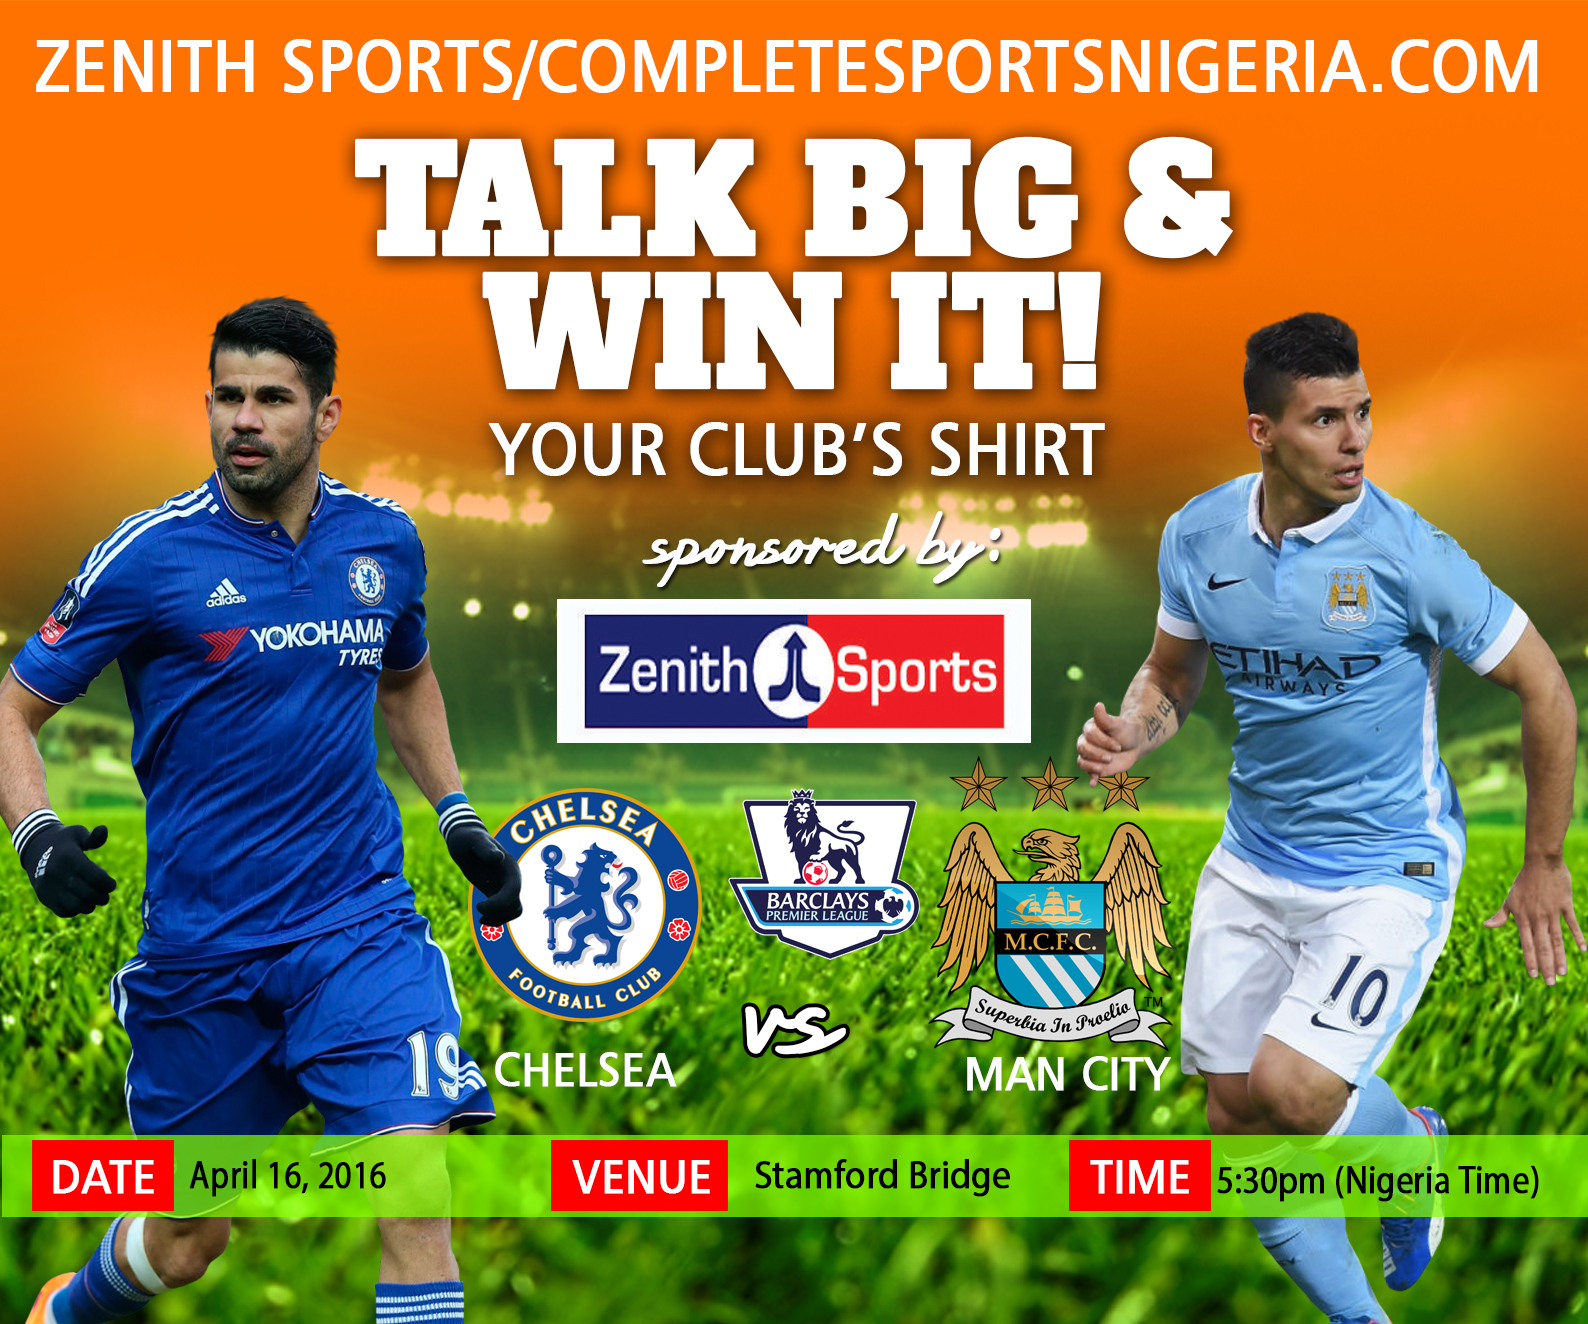 The Winners Chelsea Vs Manchester City, Talk Big and Win It!